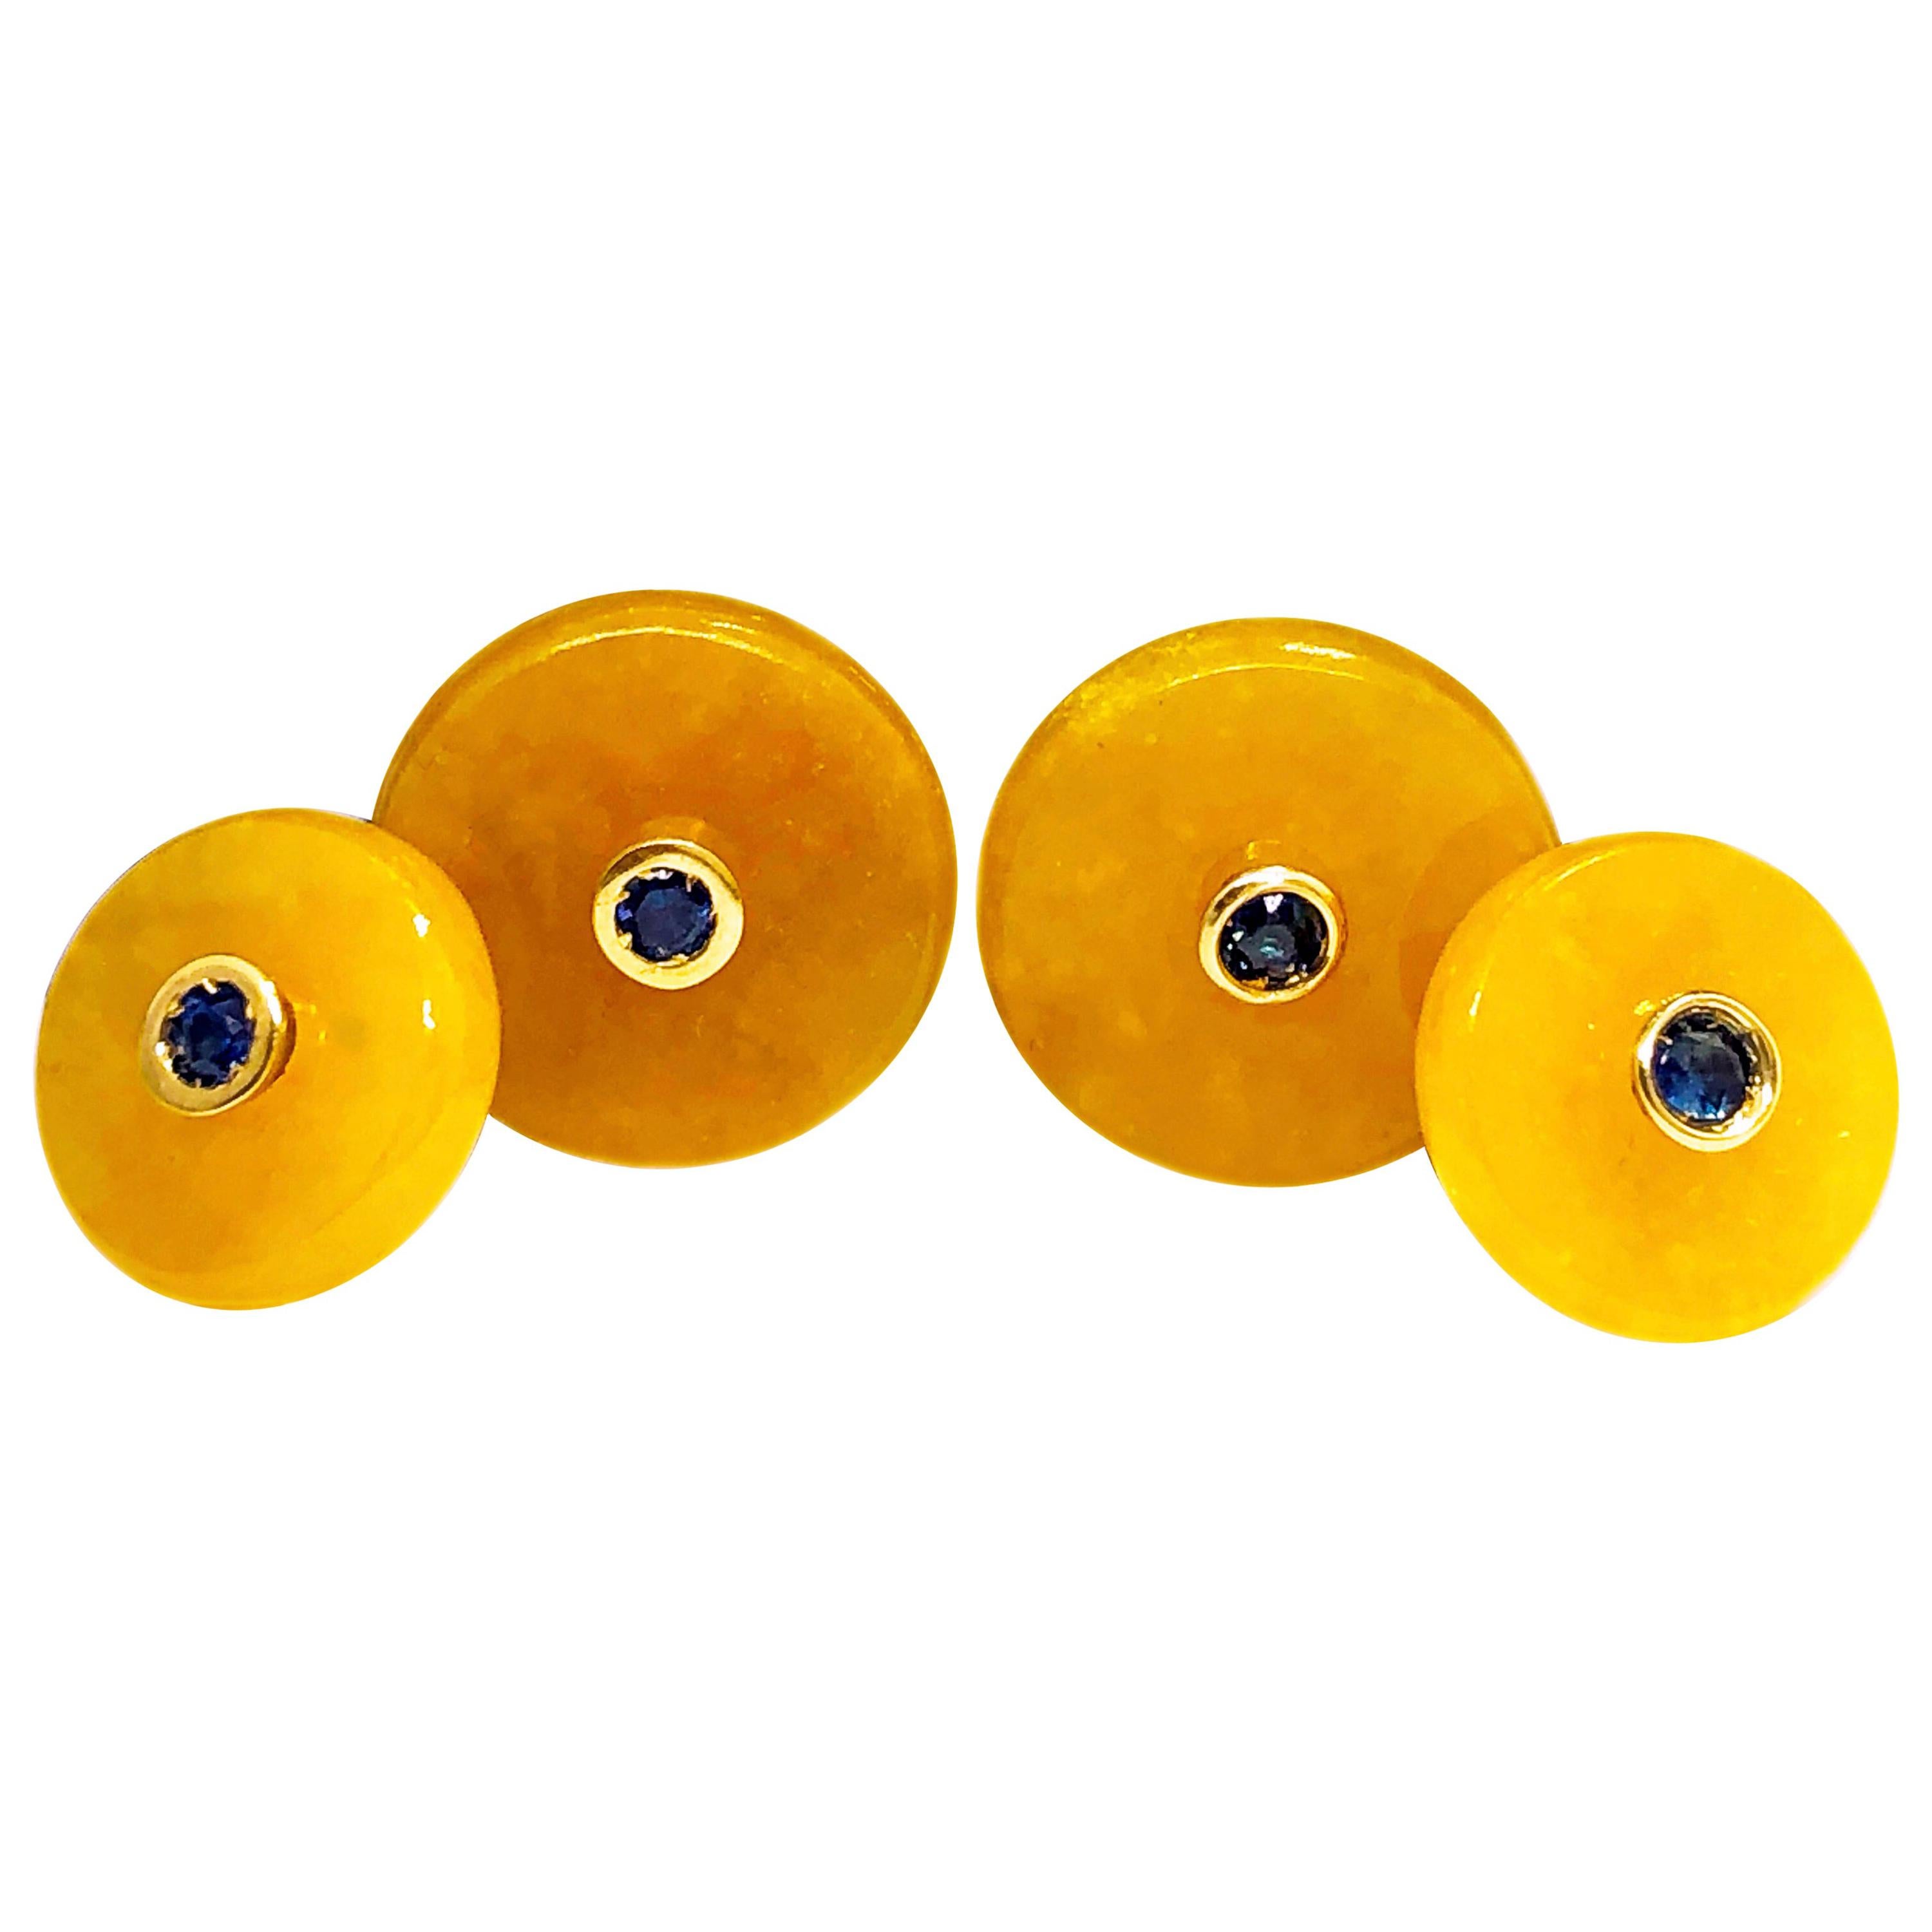 Berca Blue Sapphire in a 19.50 Kt Yellow Jade Disk 18K Gold Setting Cufflinks For Sale